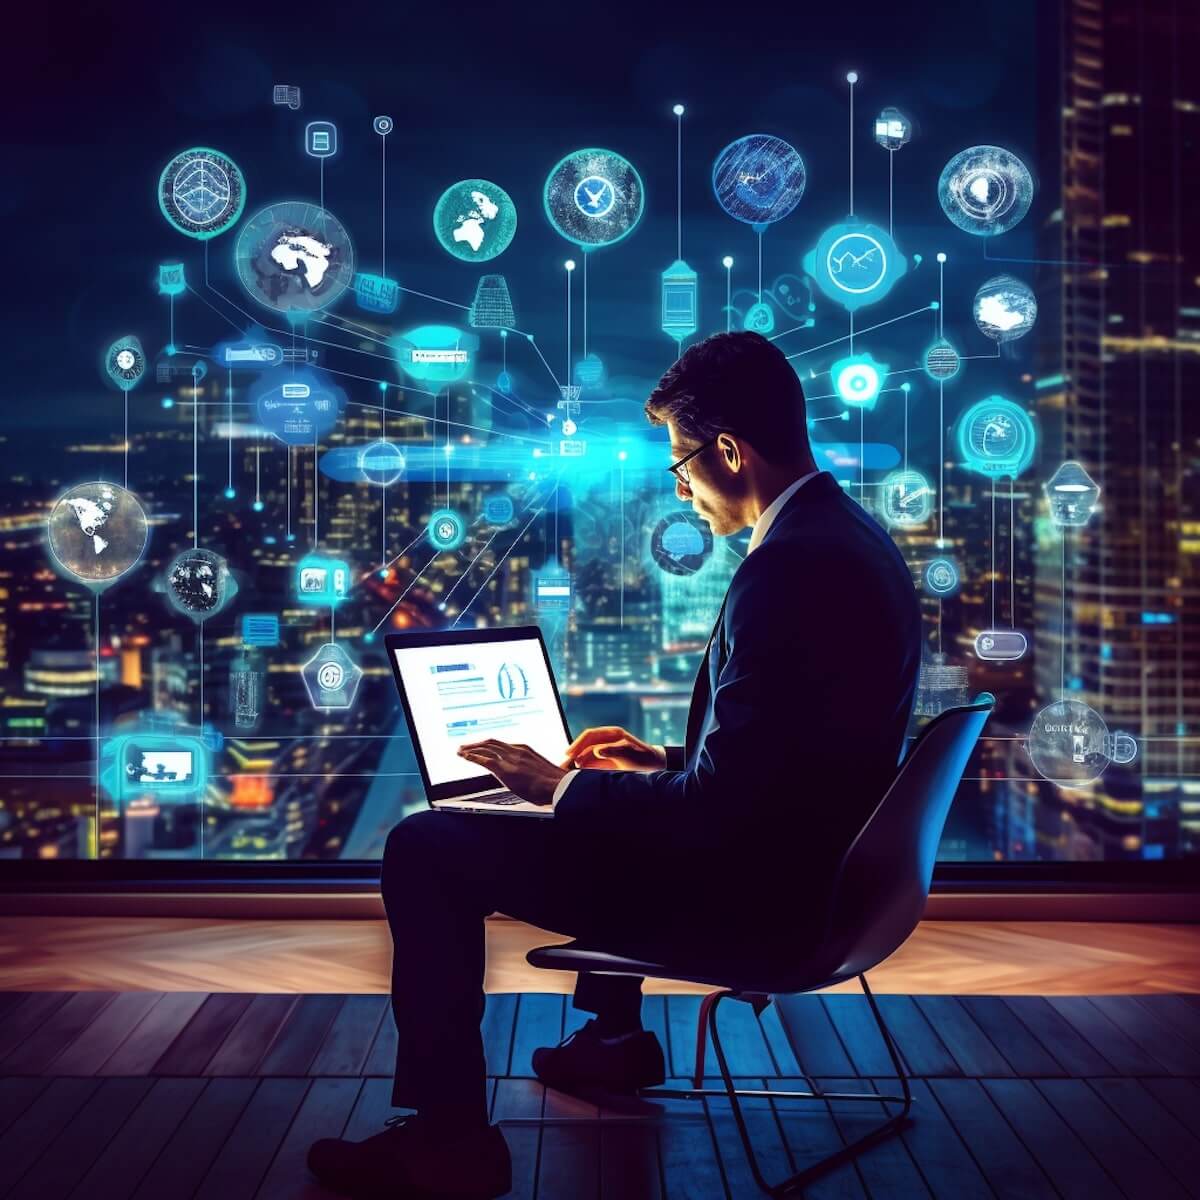 A businessman leveraging digital transformation at night in front of a city.